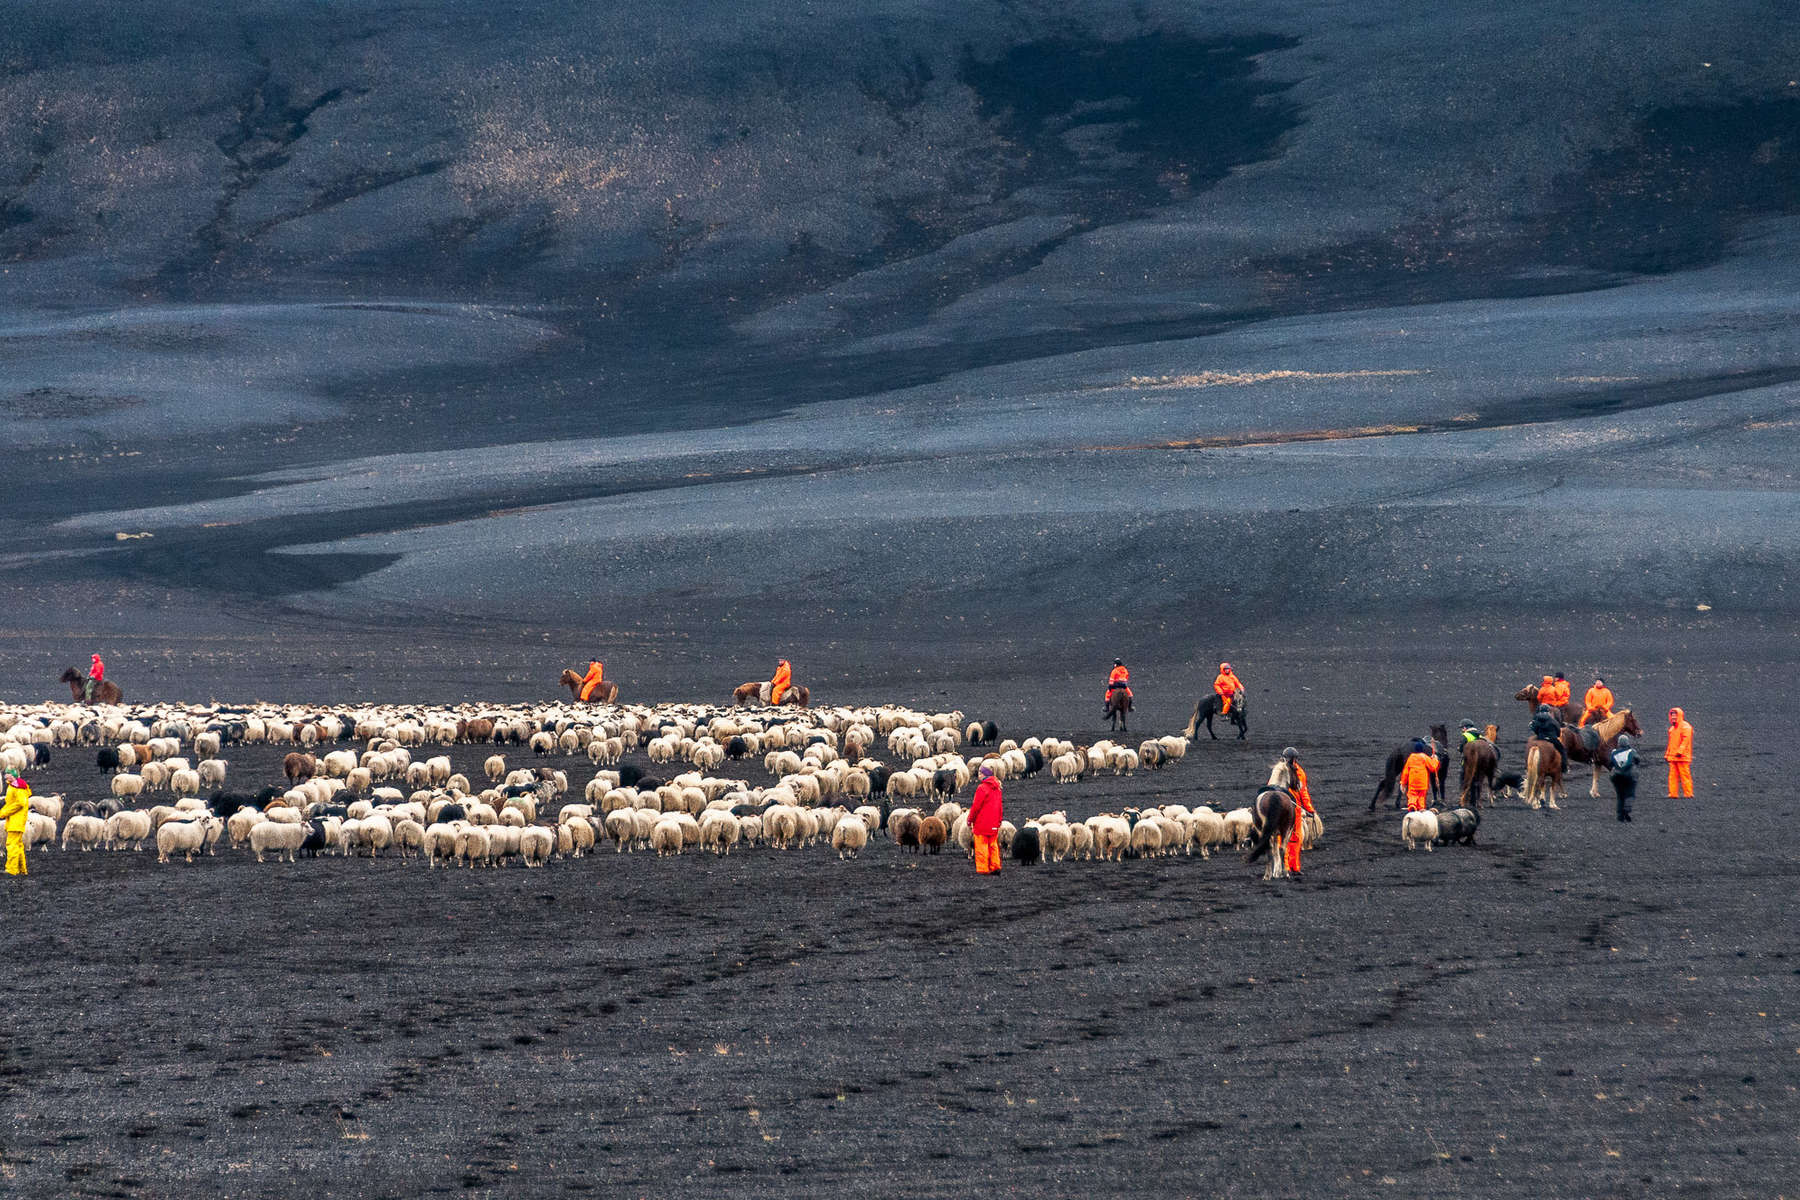 Sheep round up event in Iceland